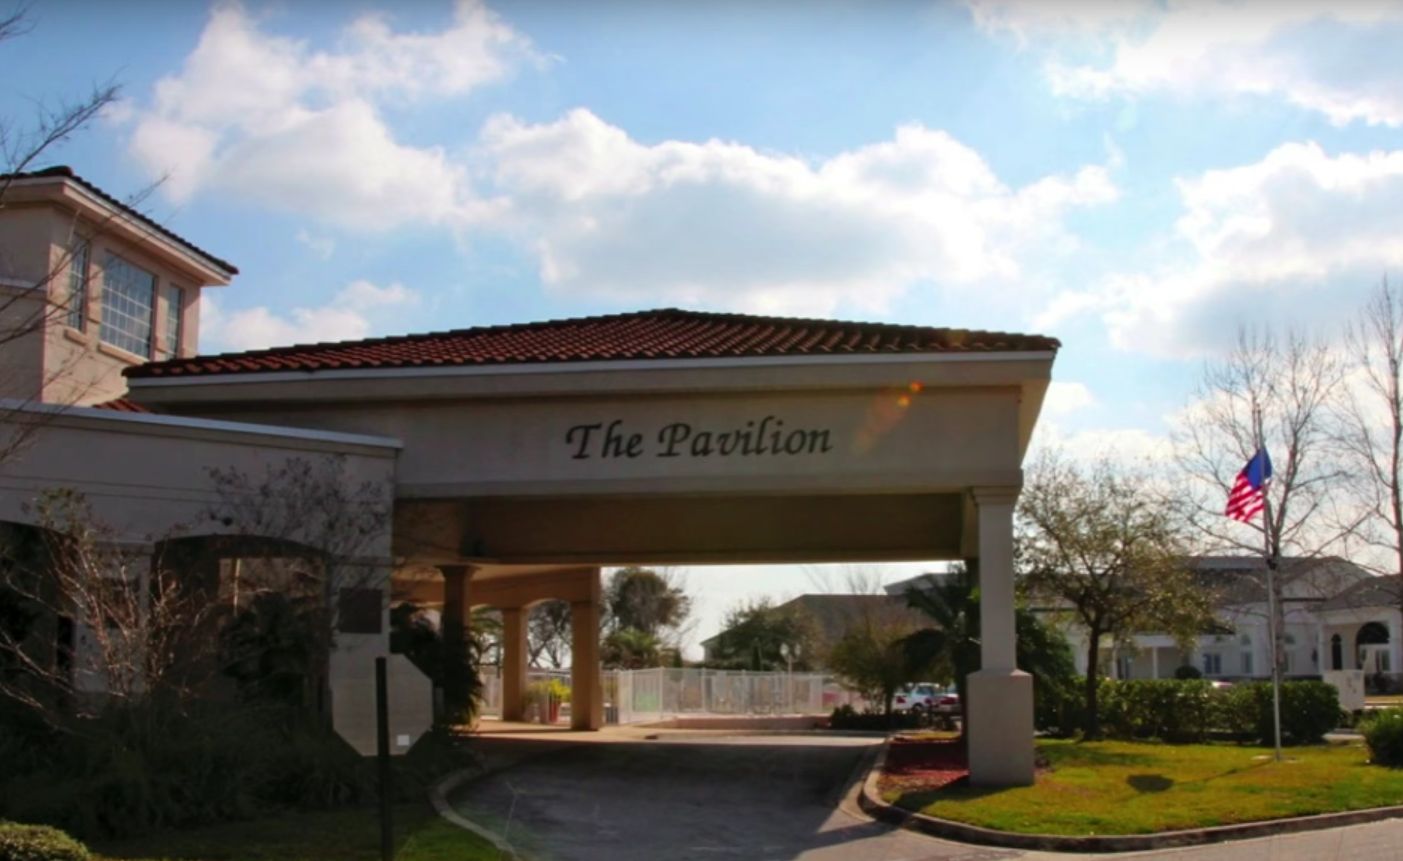 Architectural view of BayView Assisted Living Pavilion with lush greenery outdoors.